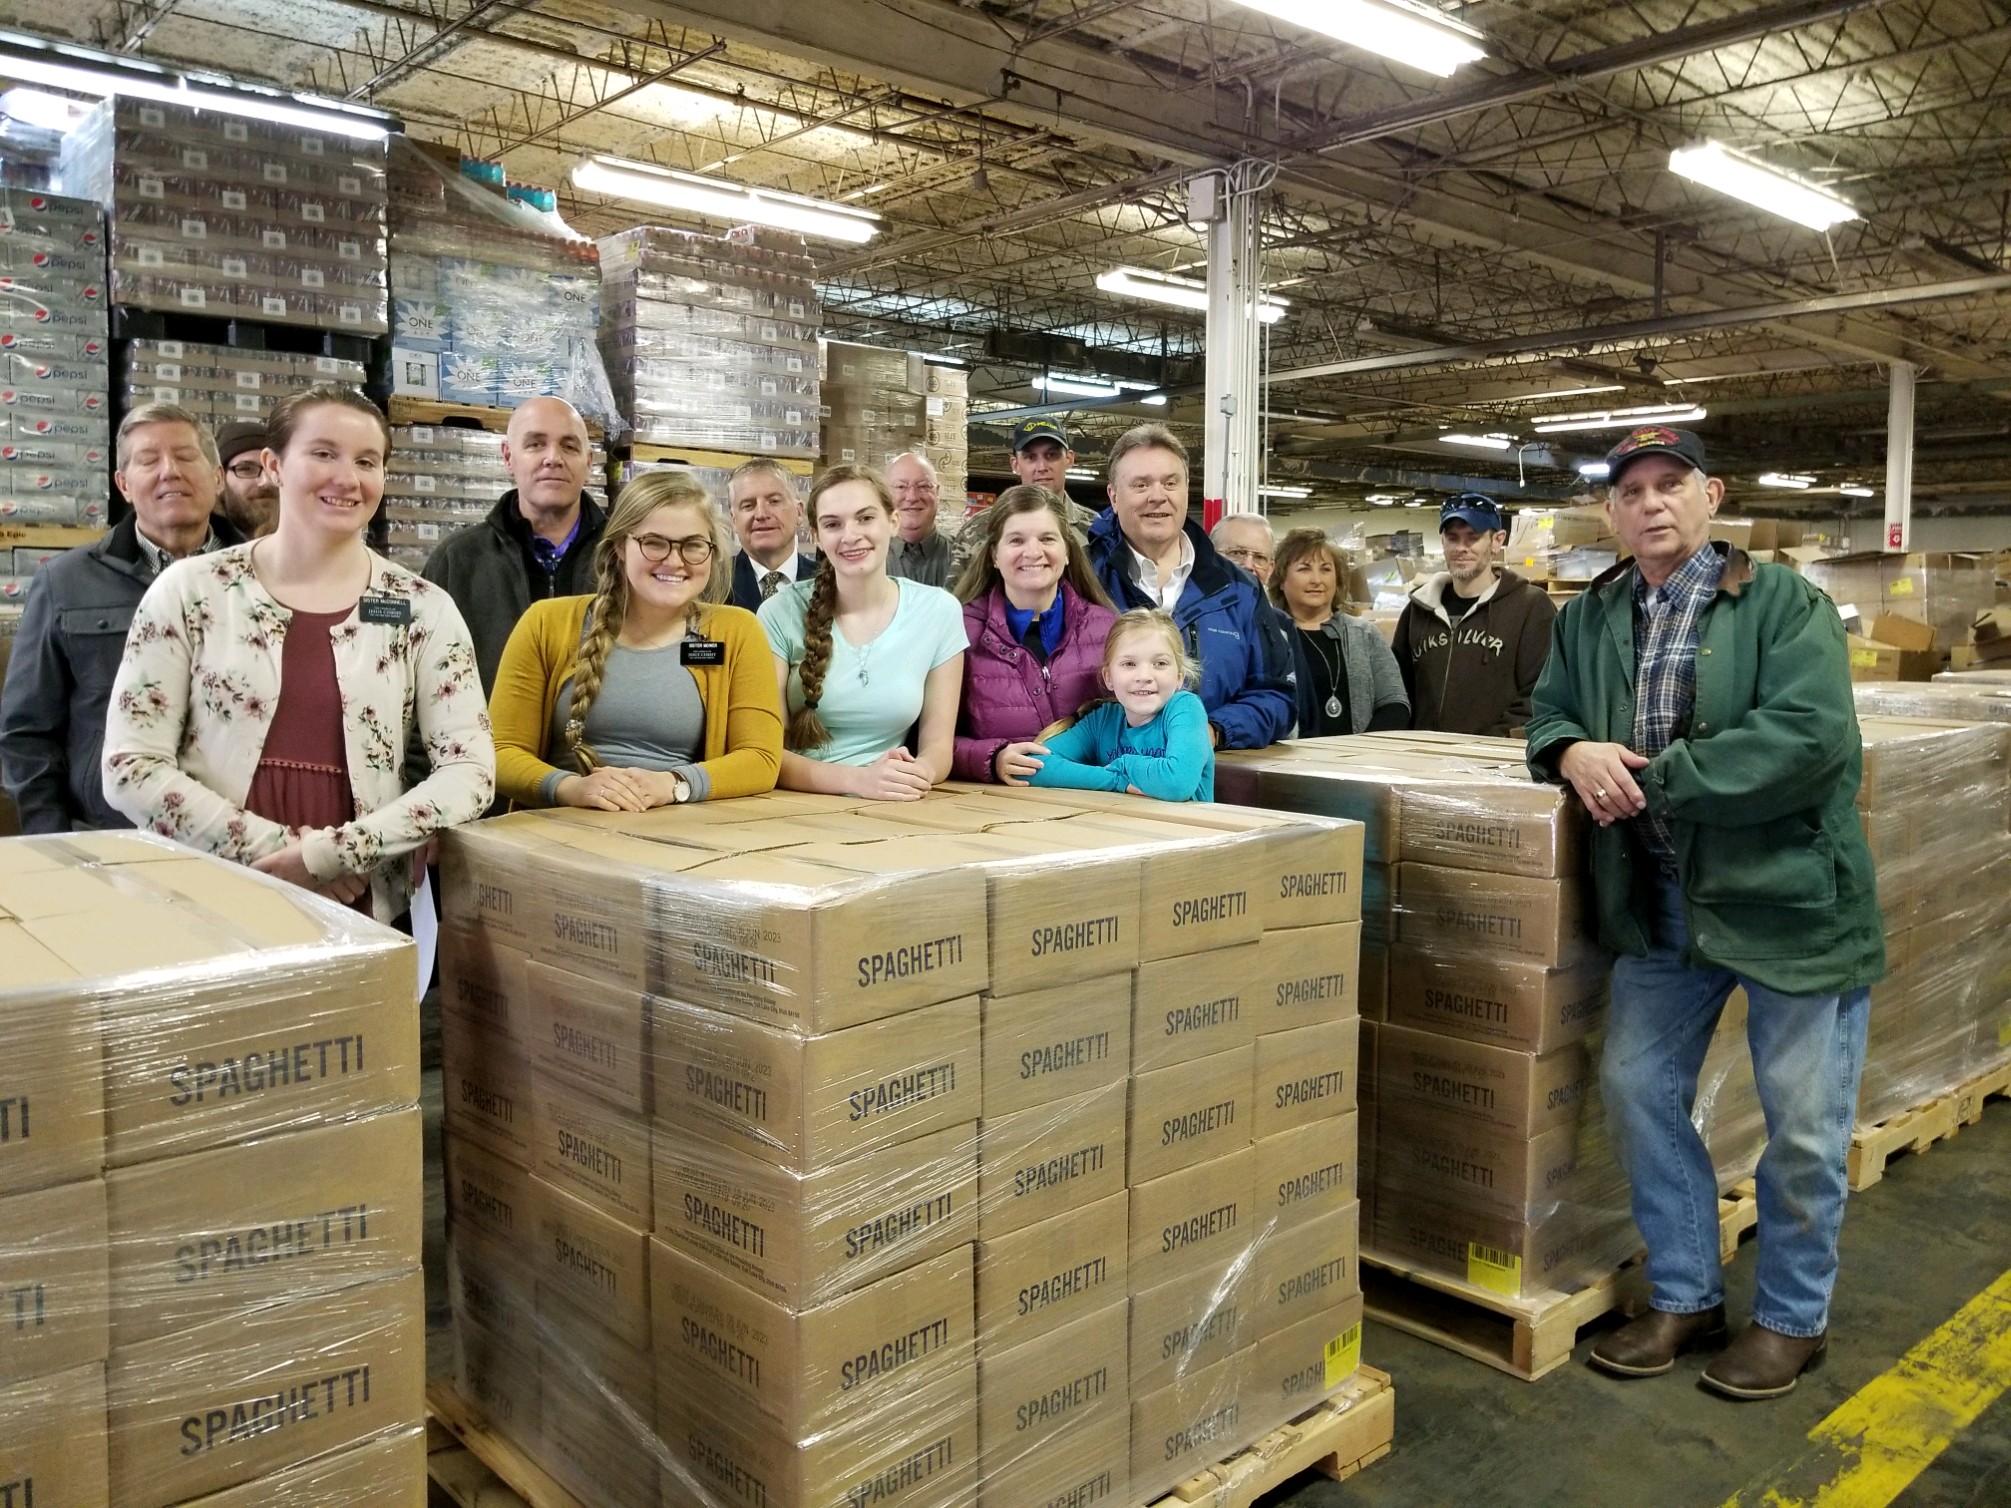 Latter-Day Saints Charities donated 27 pallets of food to help families in their local community.